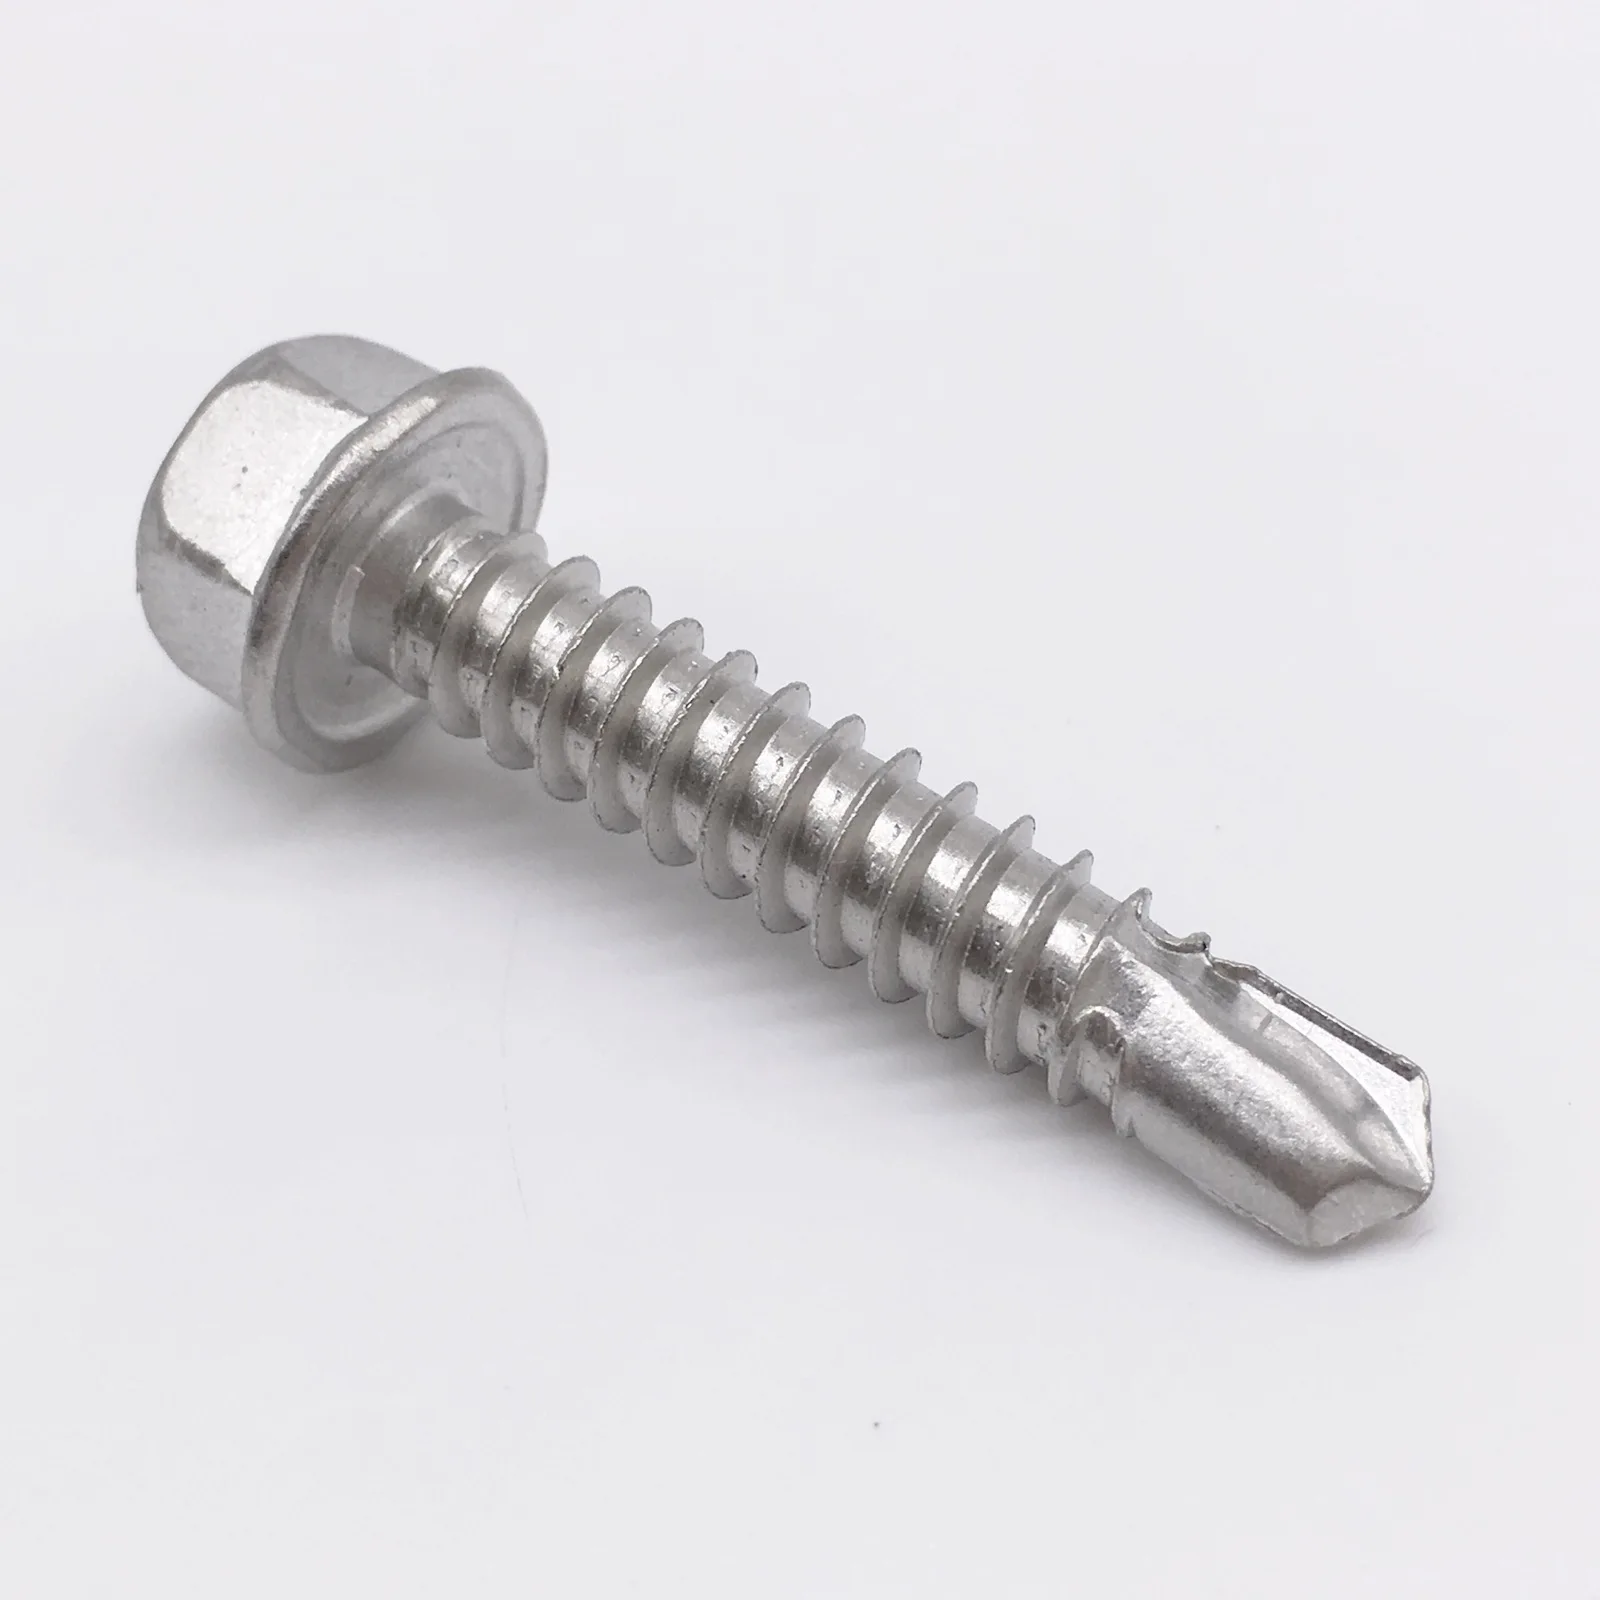 50 x Roofing Screws for Metal Sheets & Cladding Self Drill 5.5 x 57mm Hex Head 